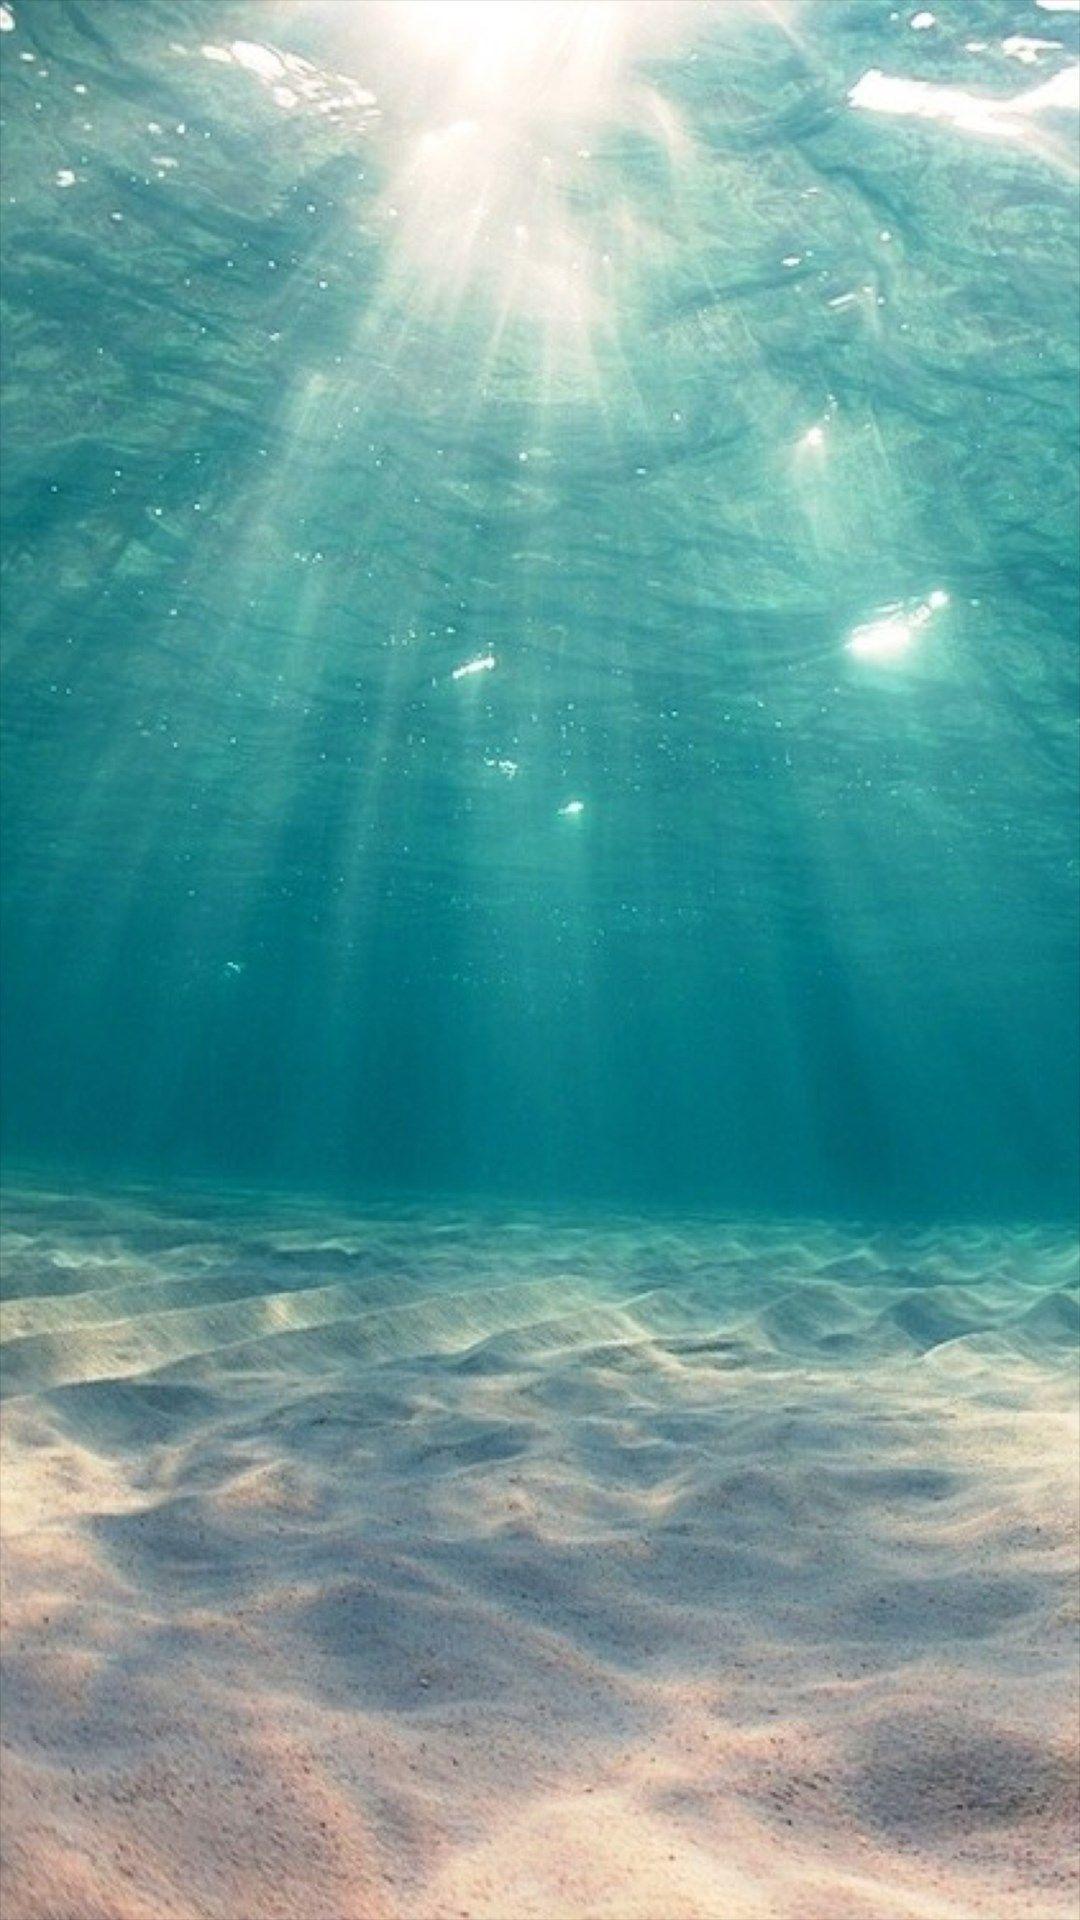 Under the Sea iPhone Wallpaper Free Under the Sea